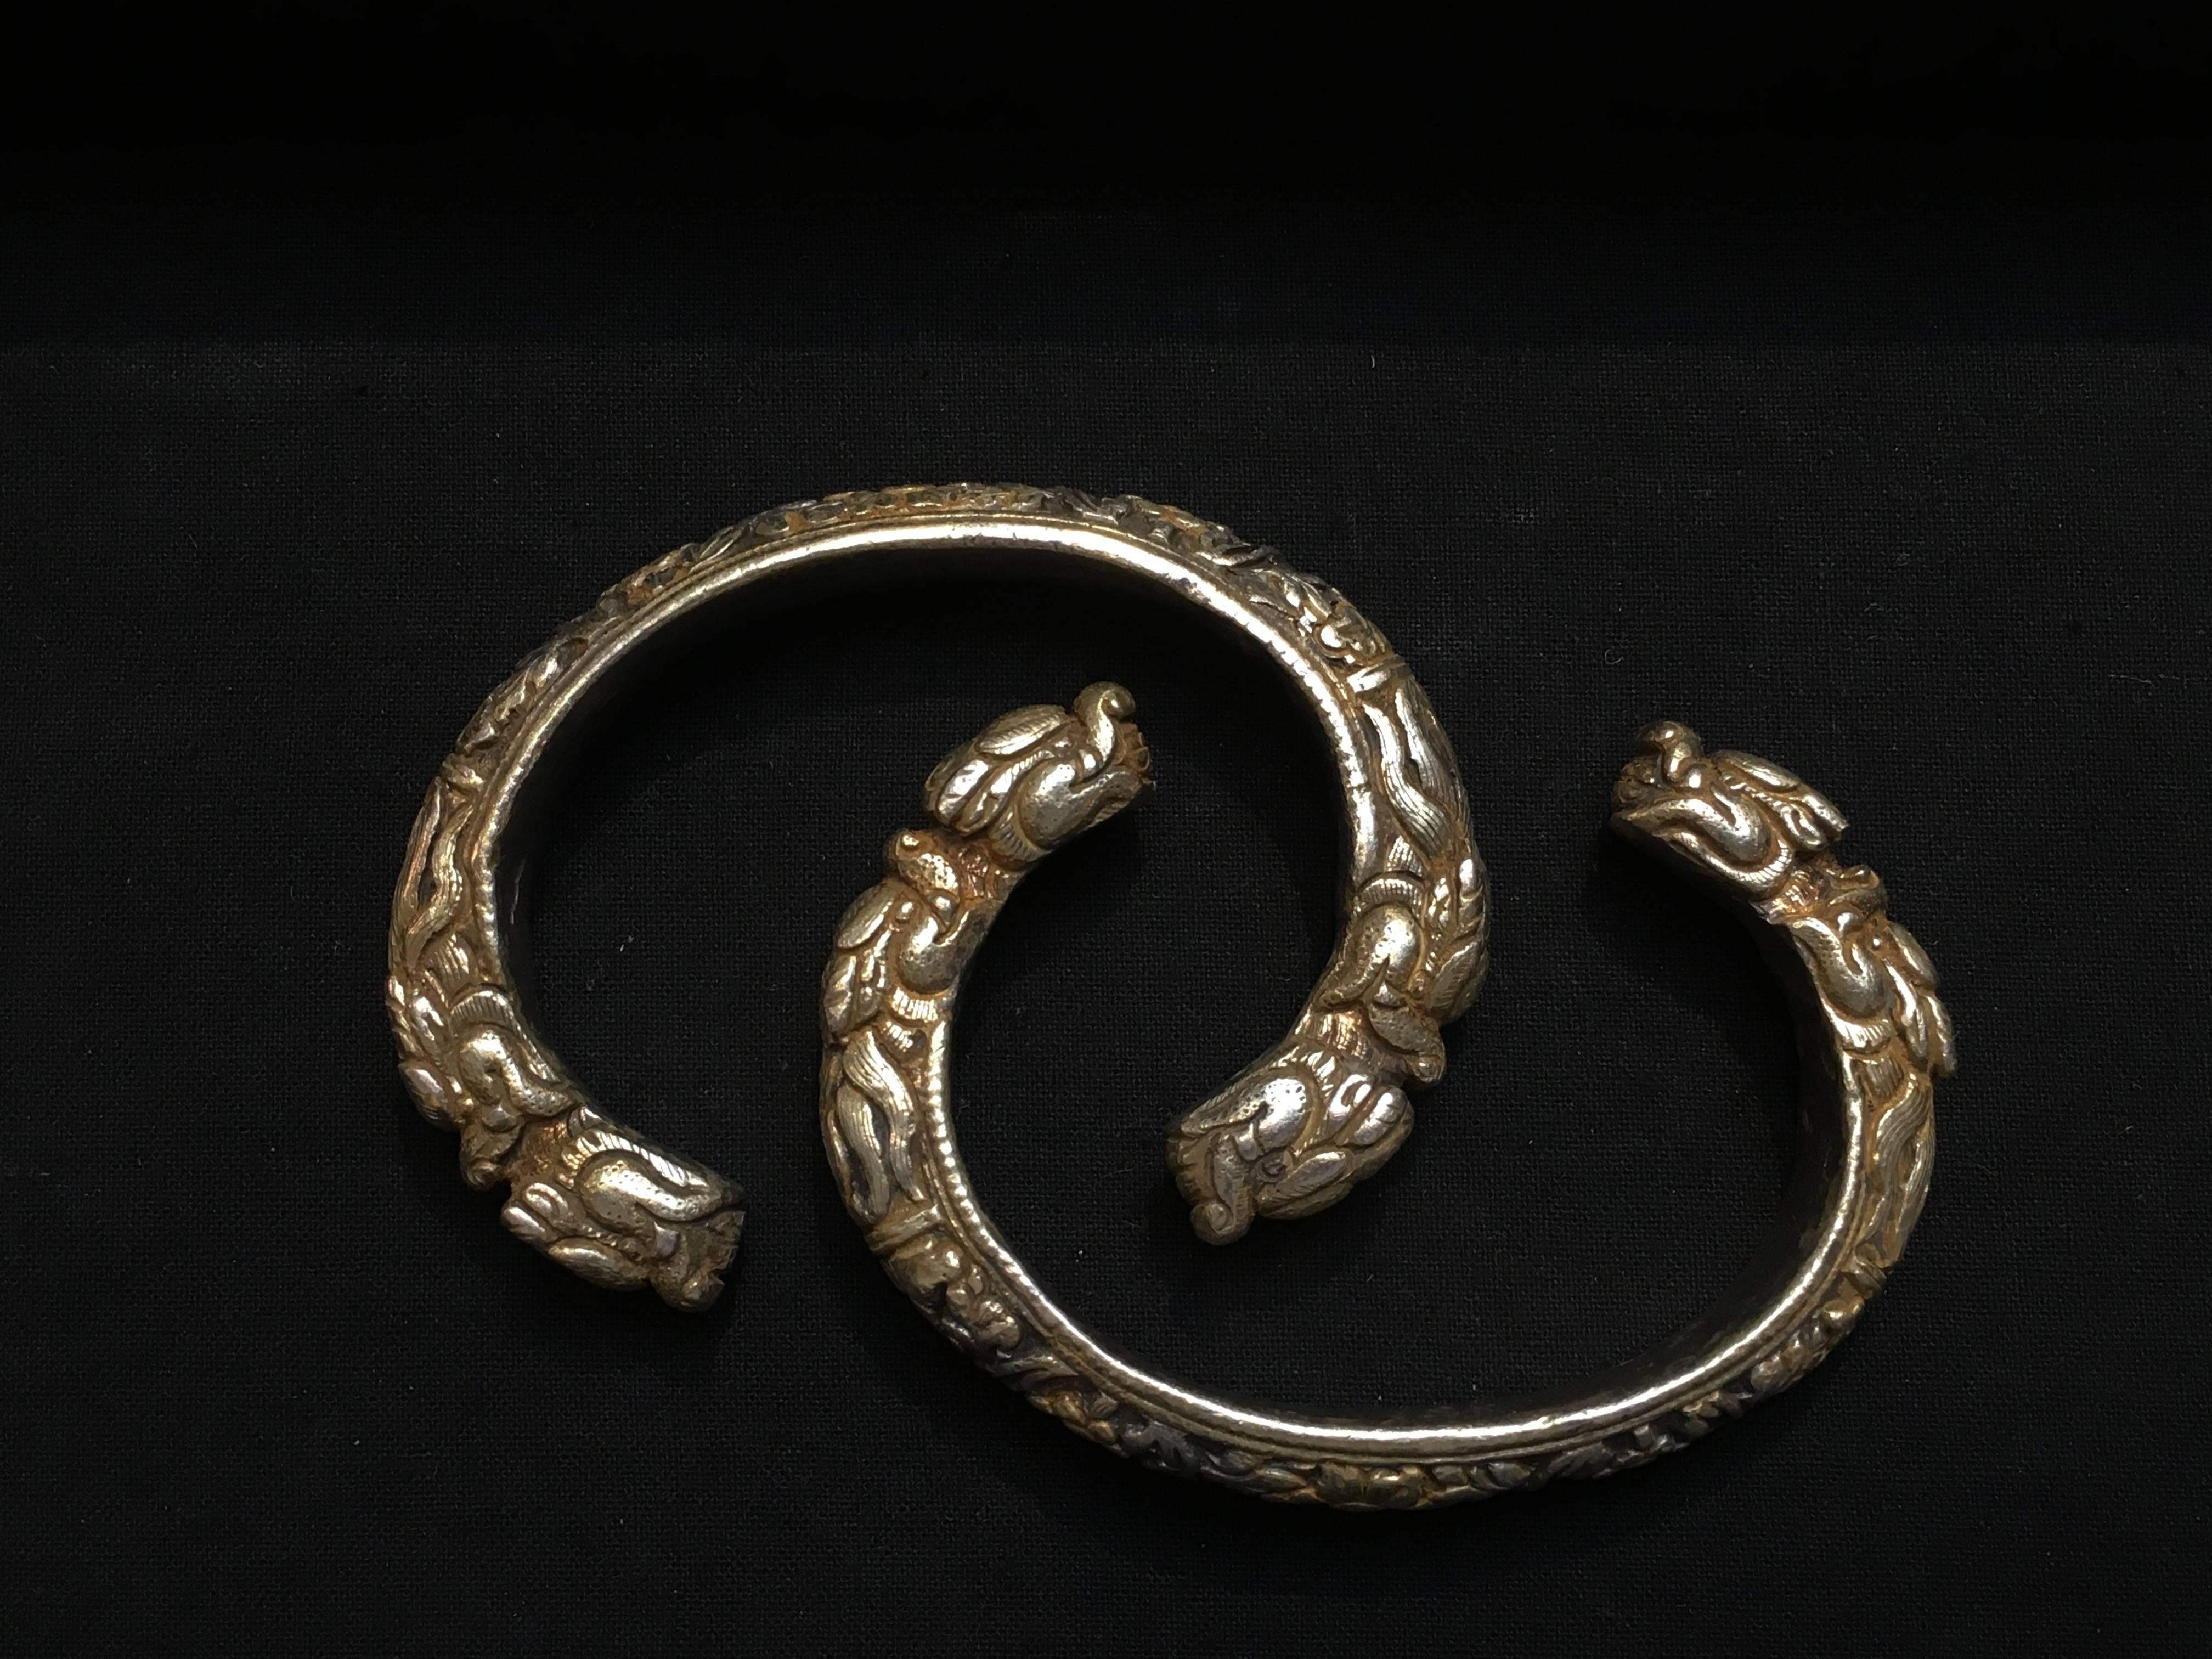 A heavy pair of cast silver and parcel gilt bangle bracelets from Bhutan, mid 20th century. Of traditional Himalayan style, the c-shaped bangles decorated with a deeply carved floral and foliate band terminating in a pair of unusual double makara